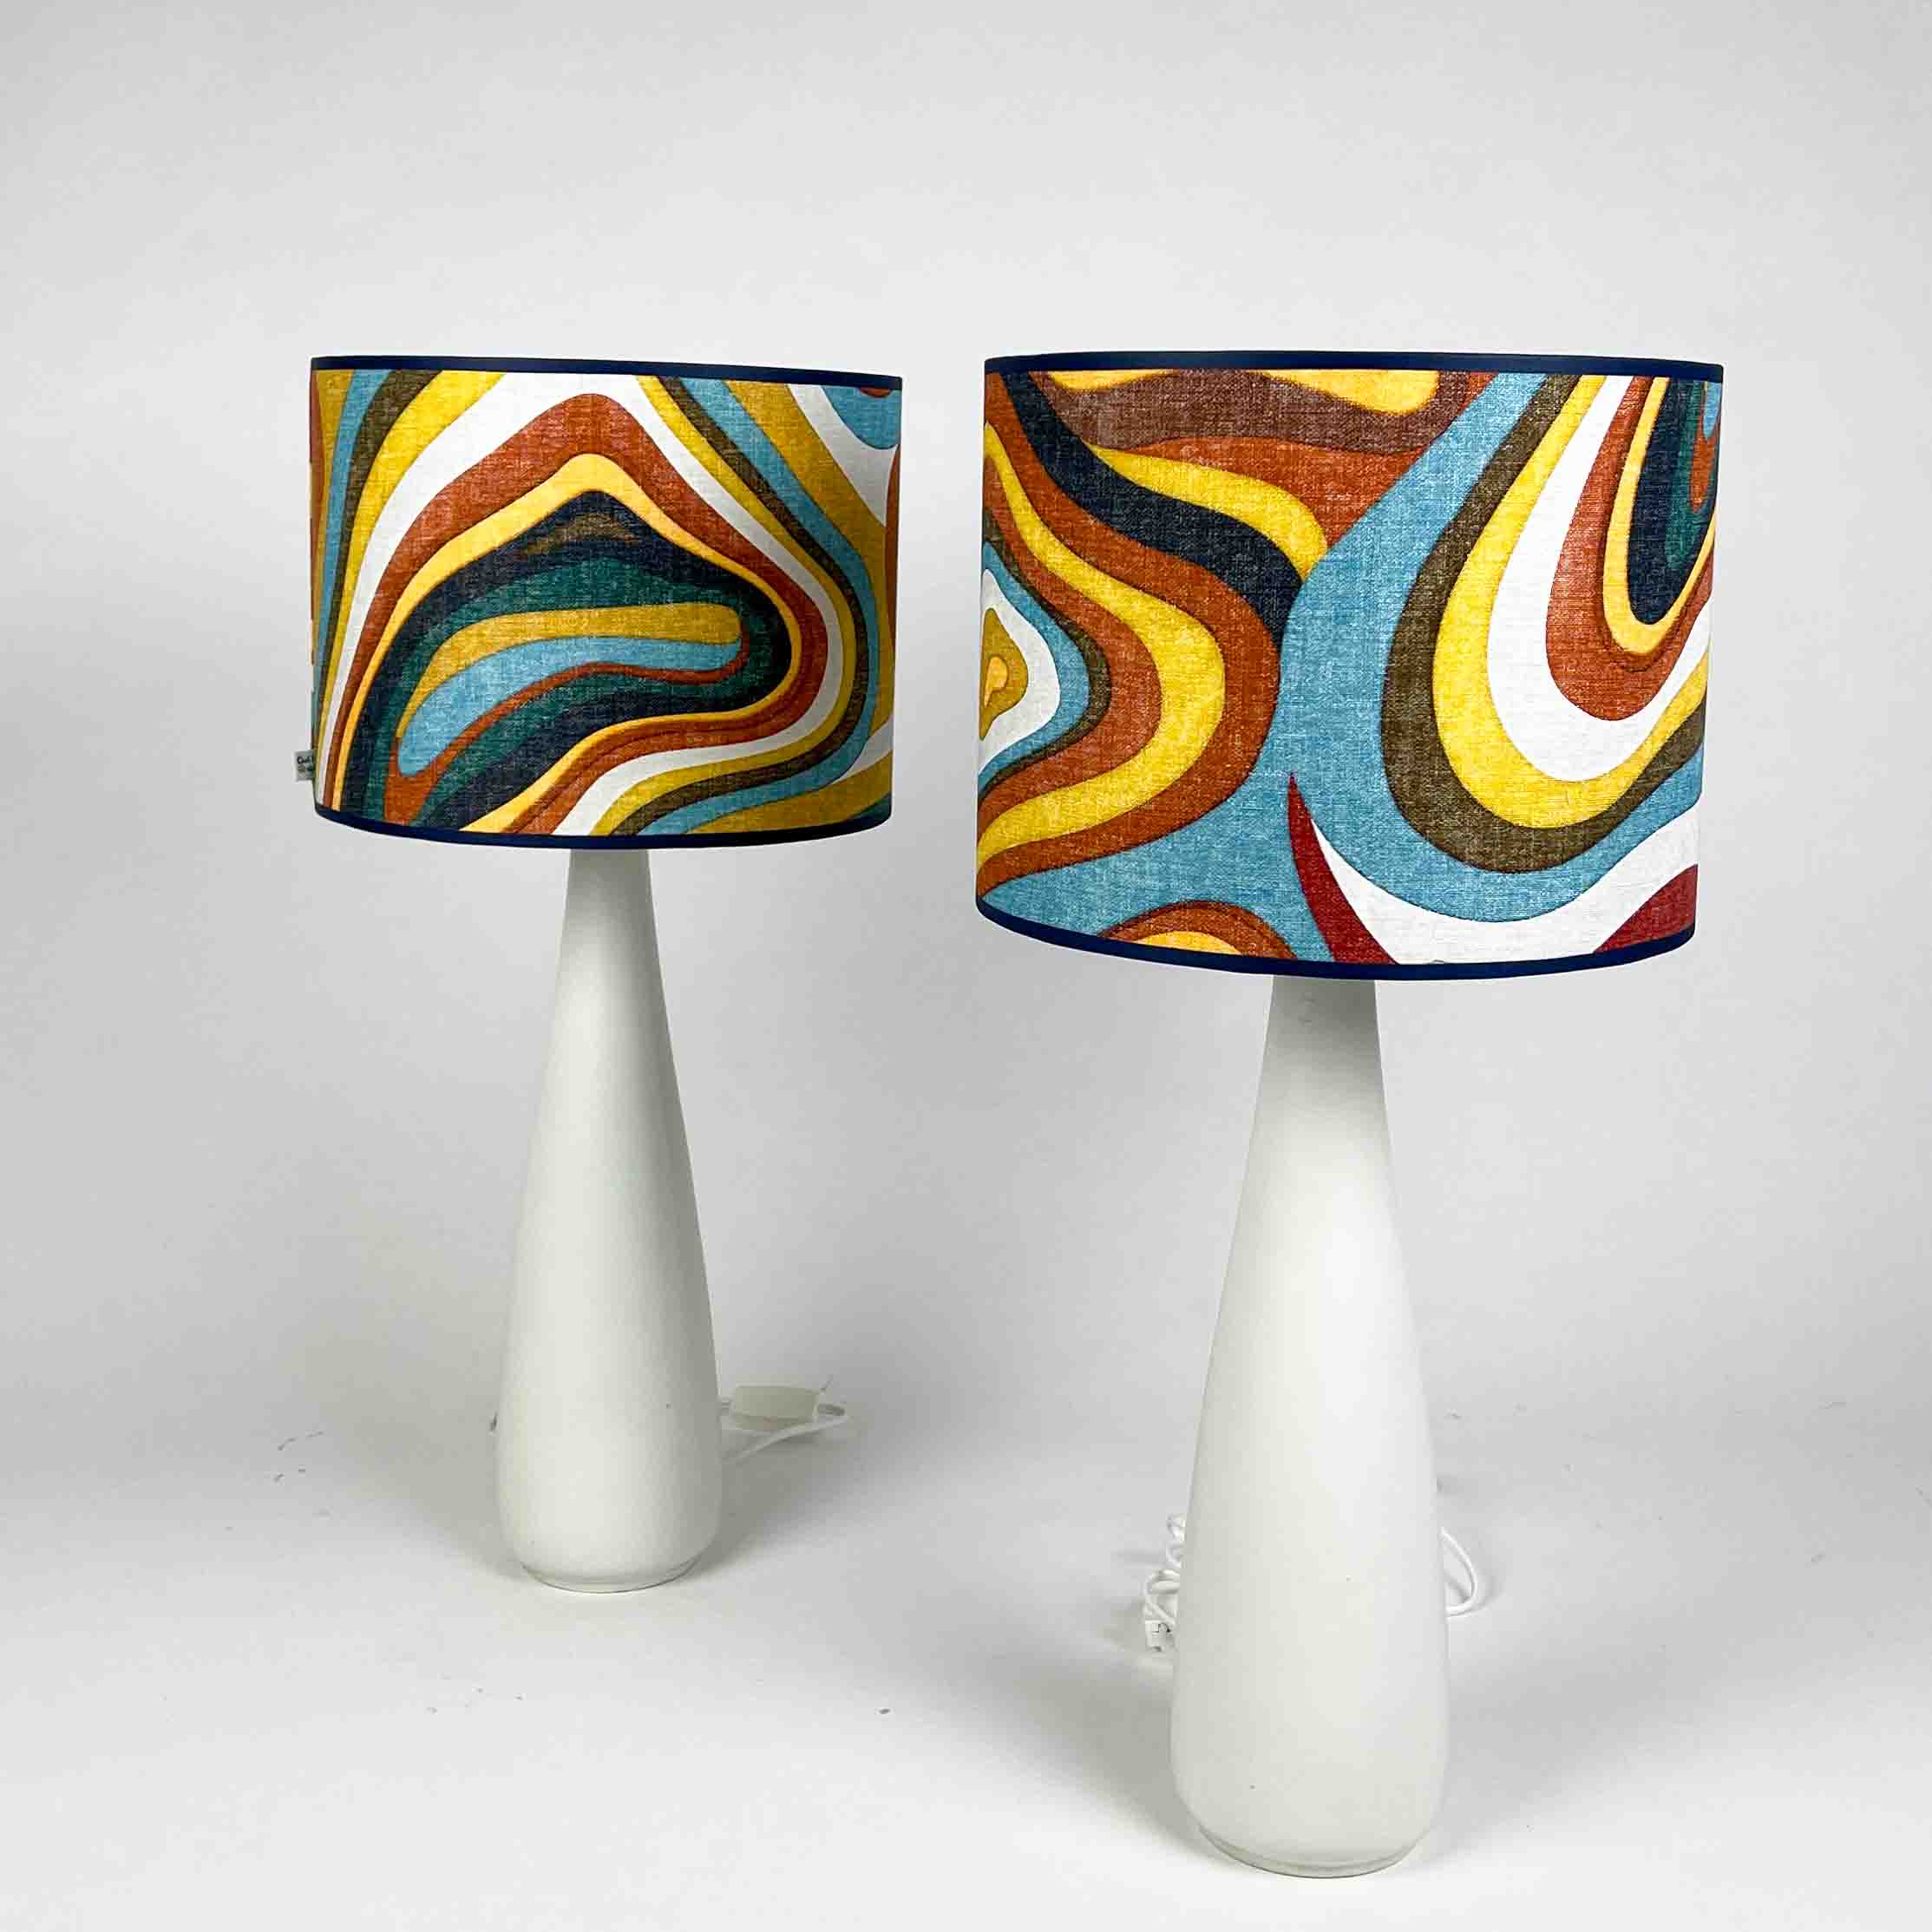 Two stoneware tablelamps with bespoke lampshades - Arabia, Finland between 1964-1972